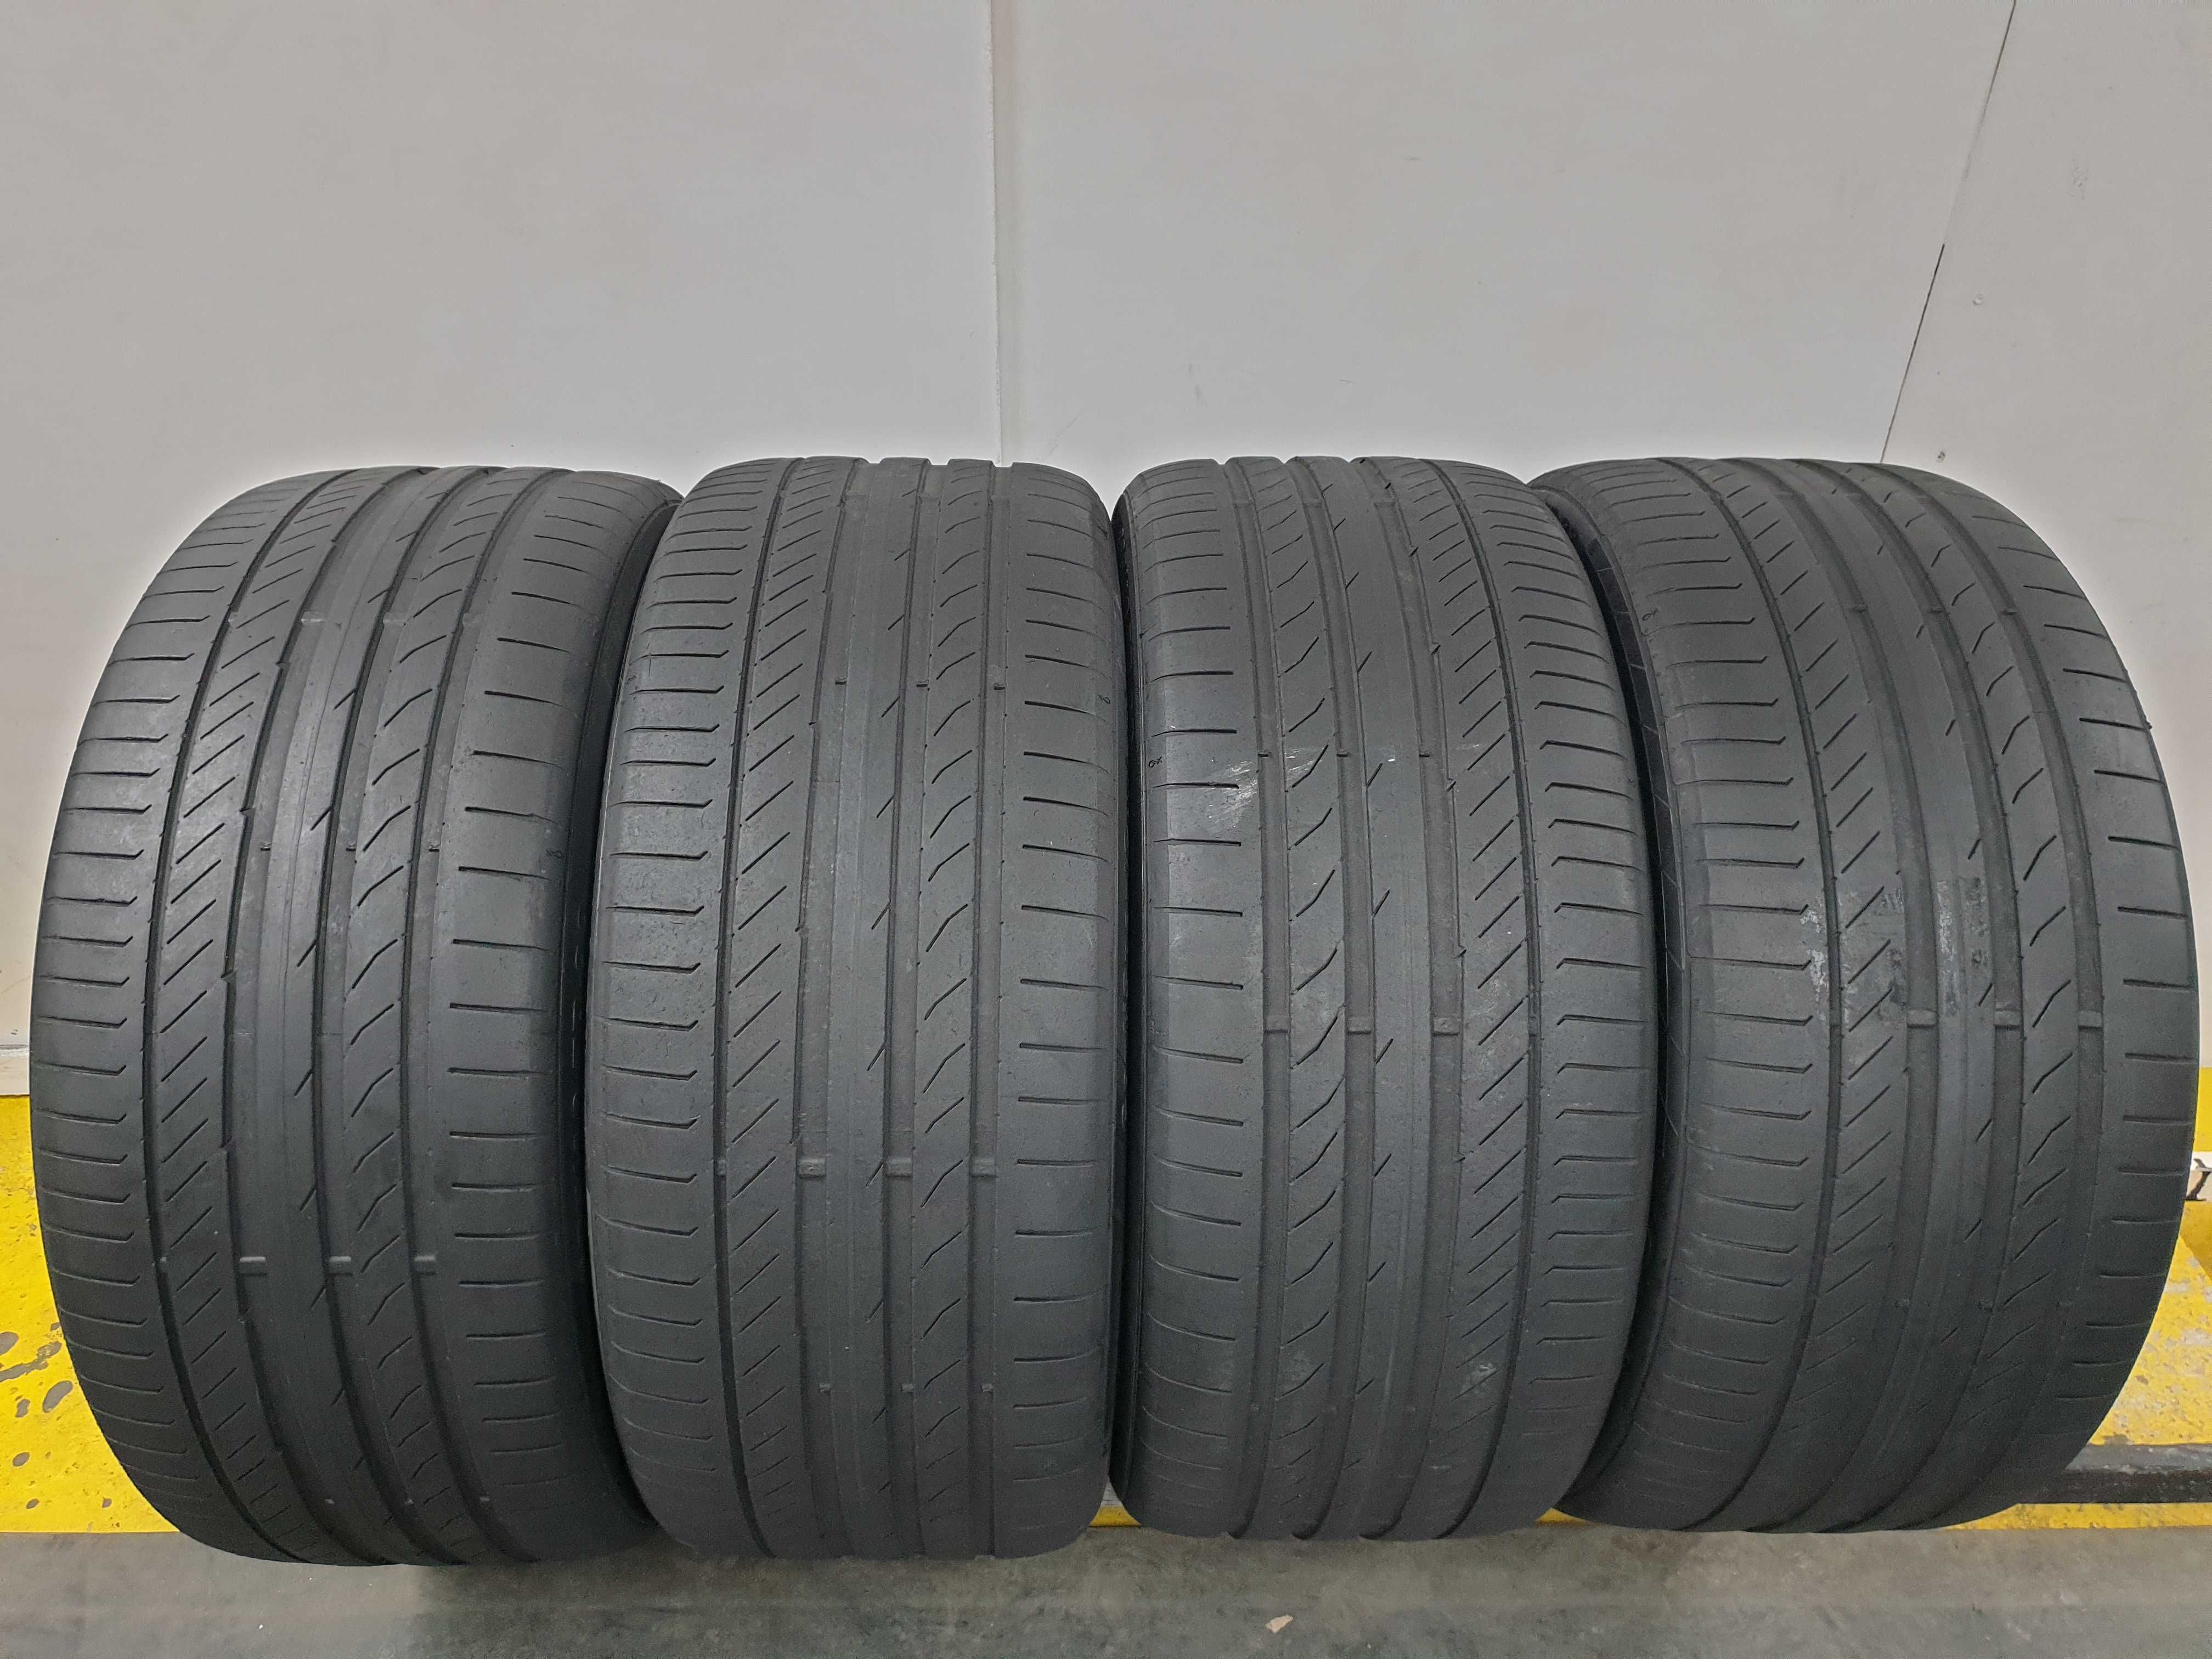 Anvelope Second Hand Continental Vara-285/40 R22 106Y,in stoc R20/21